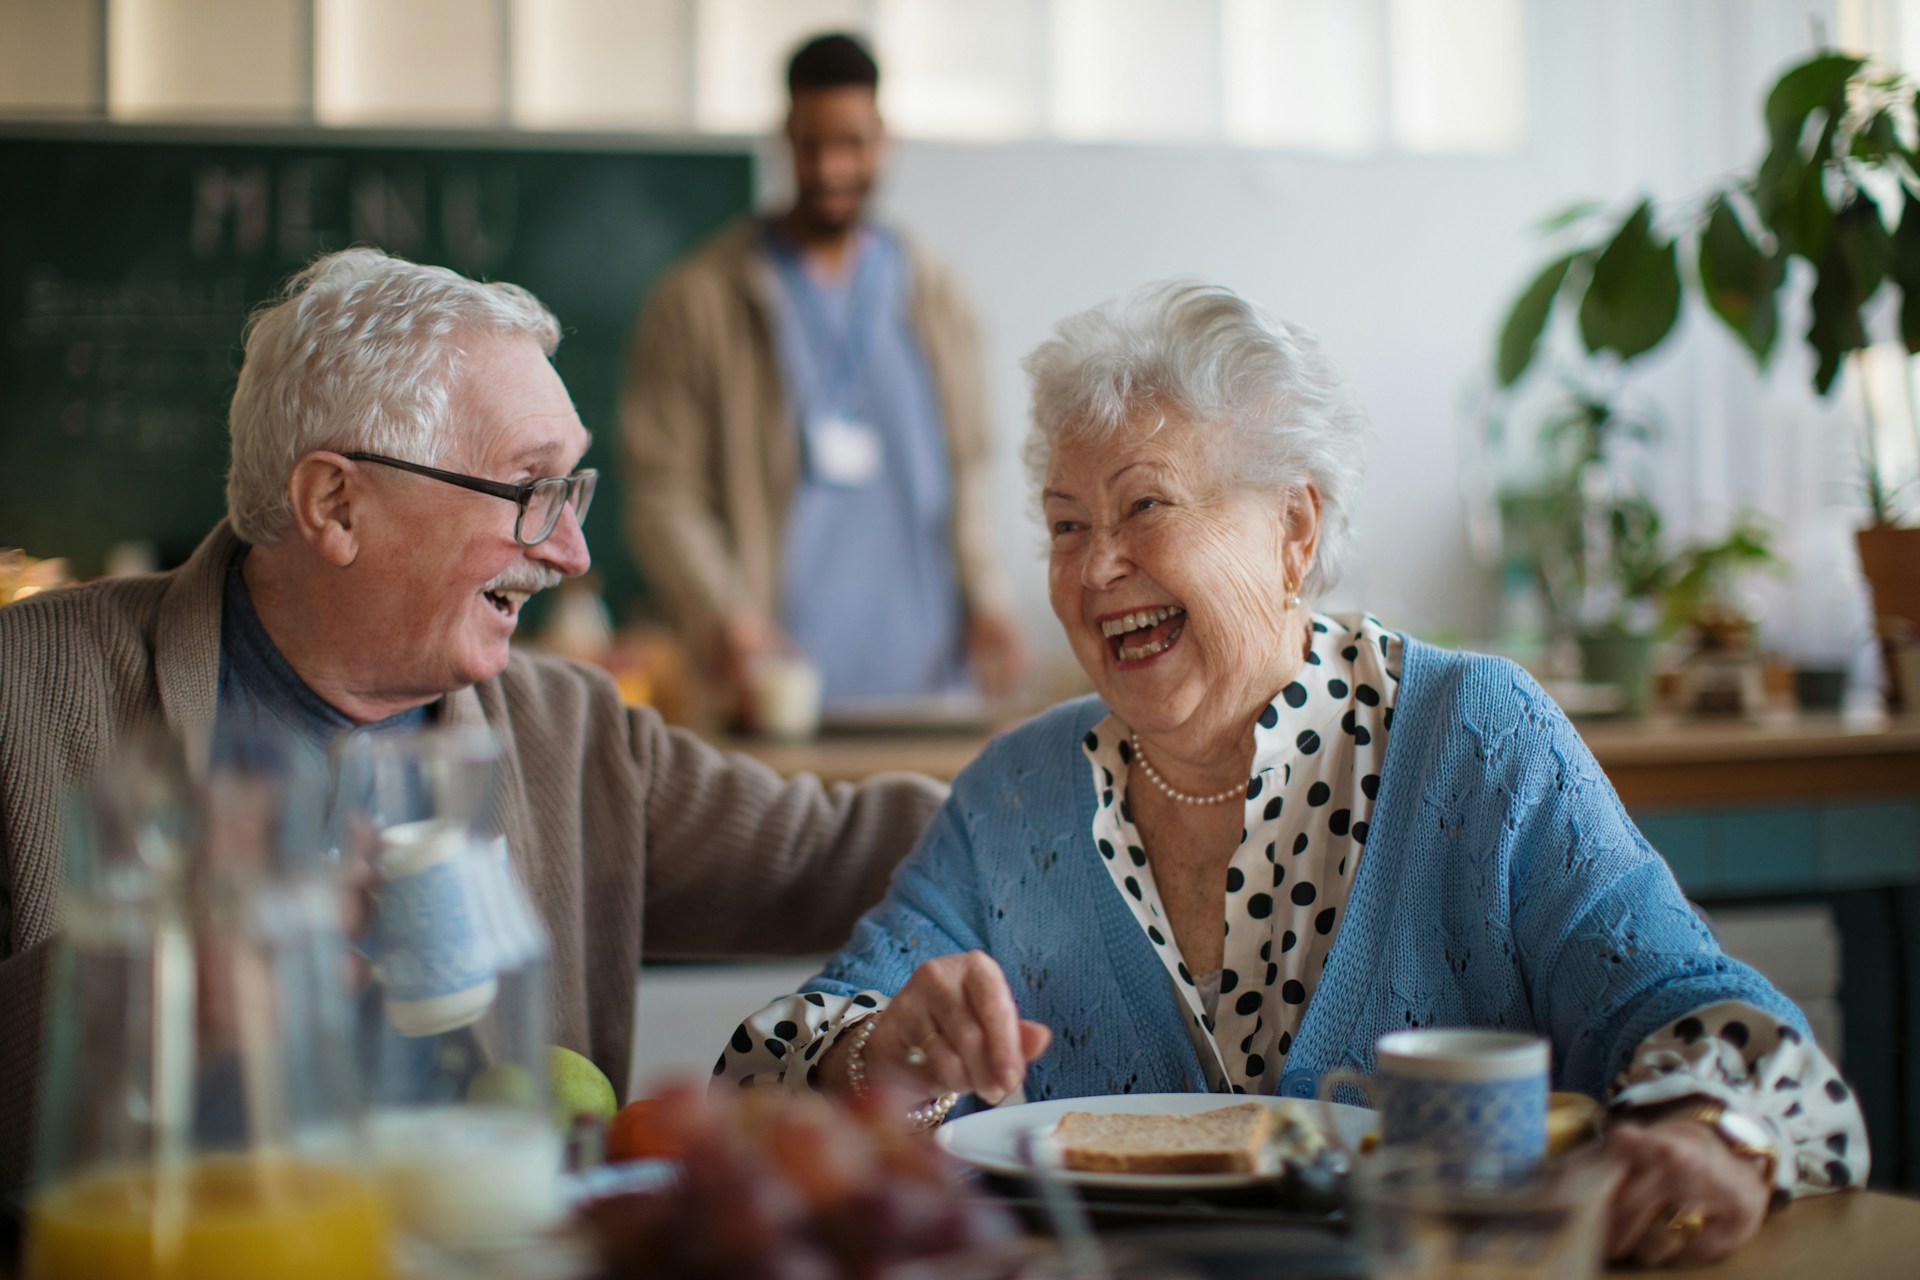 Programmatic Display Advertising for Senior Care & Assisted Living Facilities